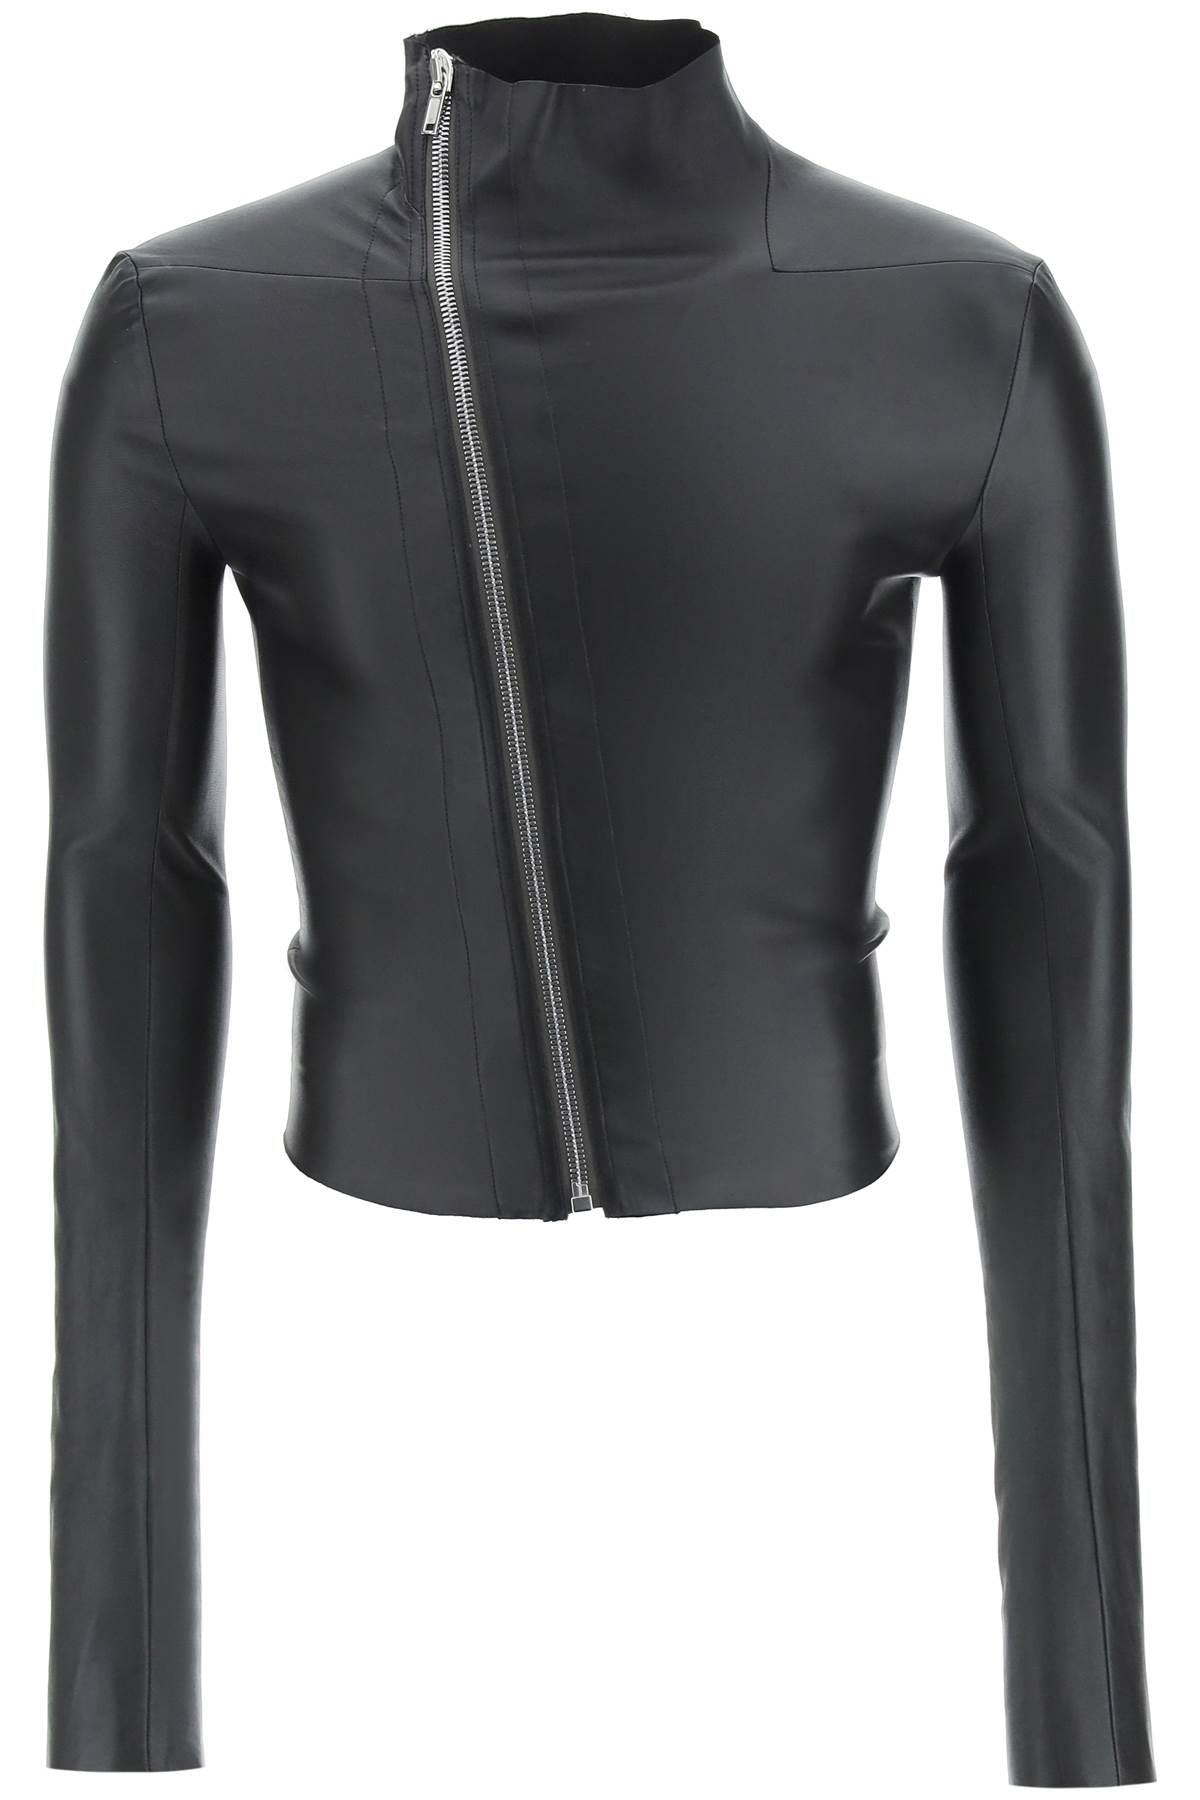 Rick Owens Gary Leather Jacket in Black for Men - Lyst